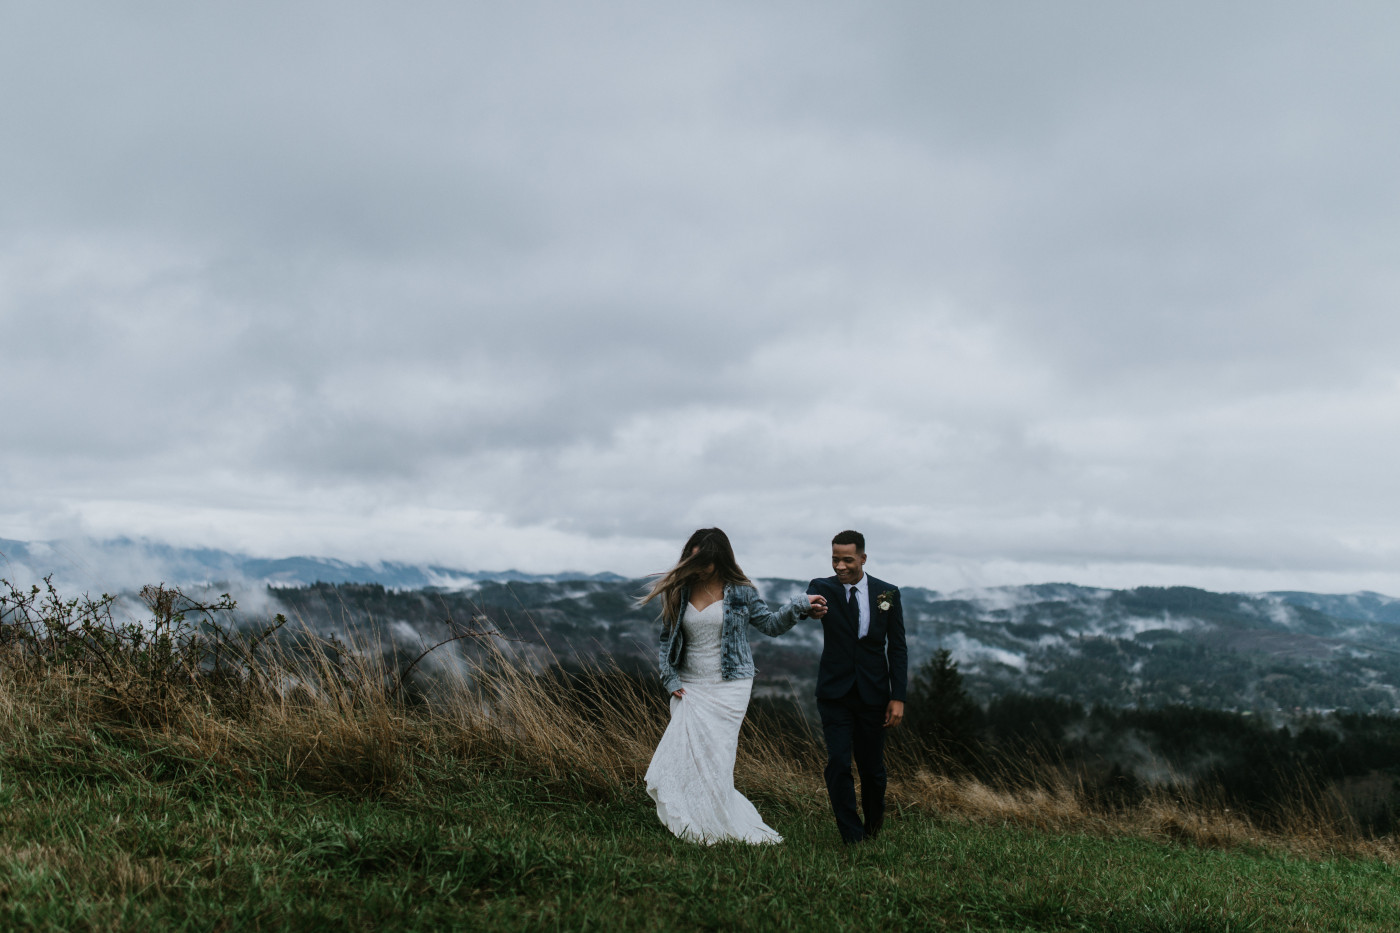 Ariana holds Deandre's hand as they walk. Elopement photography at Mount Hood by Sienna Plus Josh.